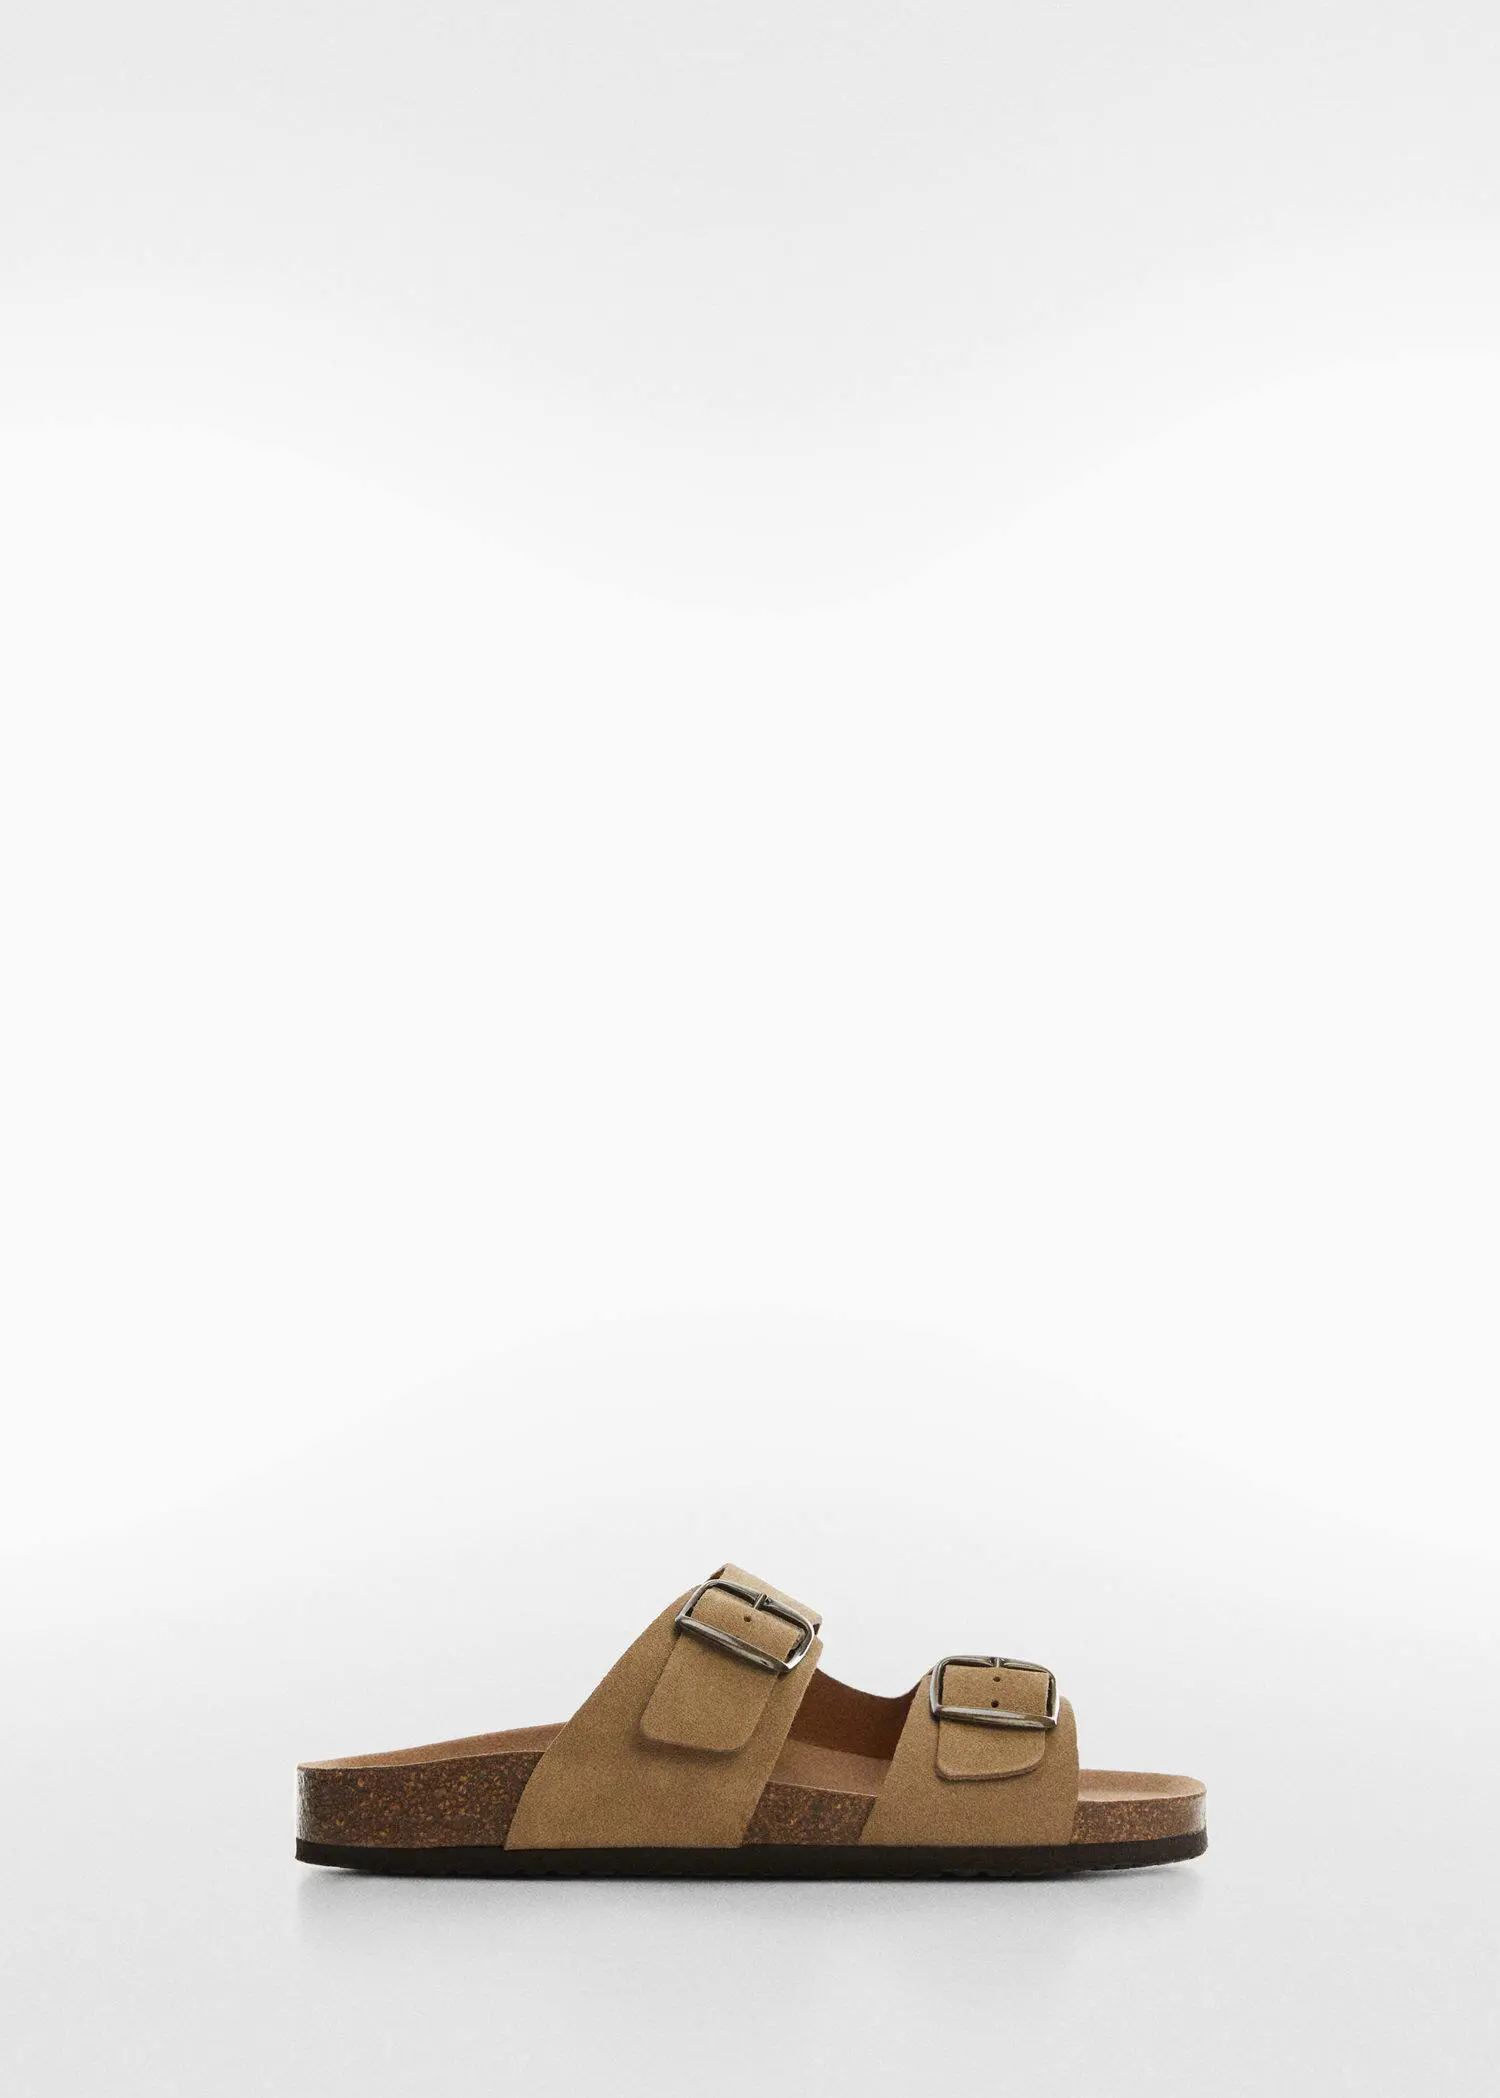 Mango Split leather sandals with buckle. a pair of brown sandals sitting on top of a white surface. 